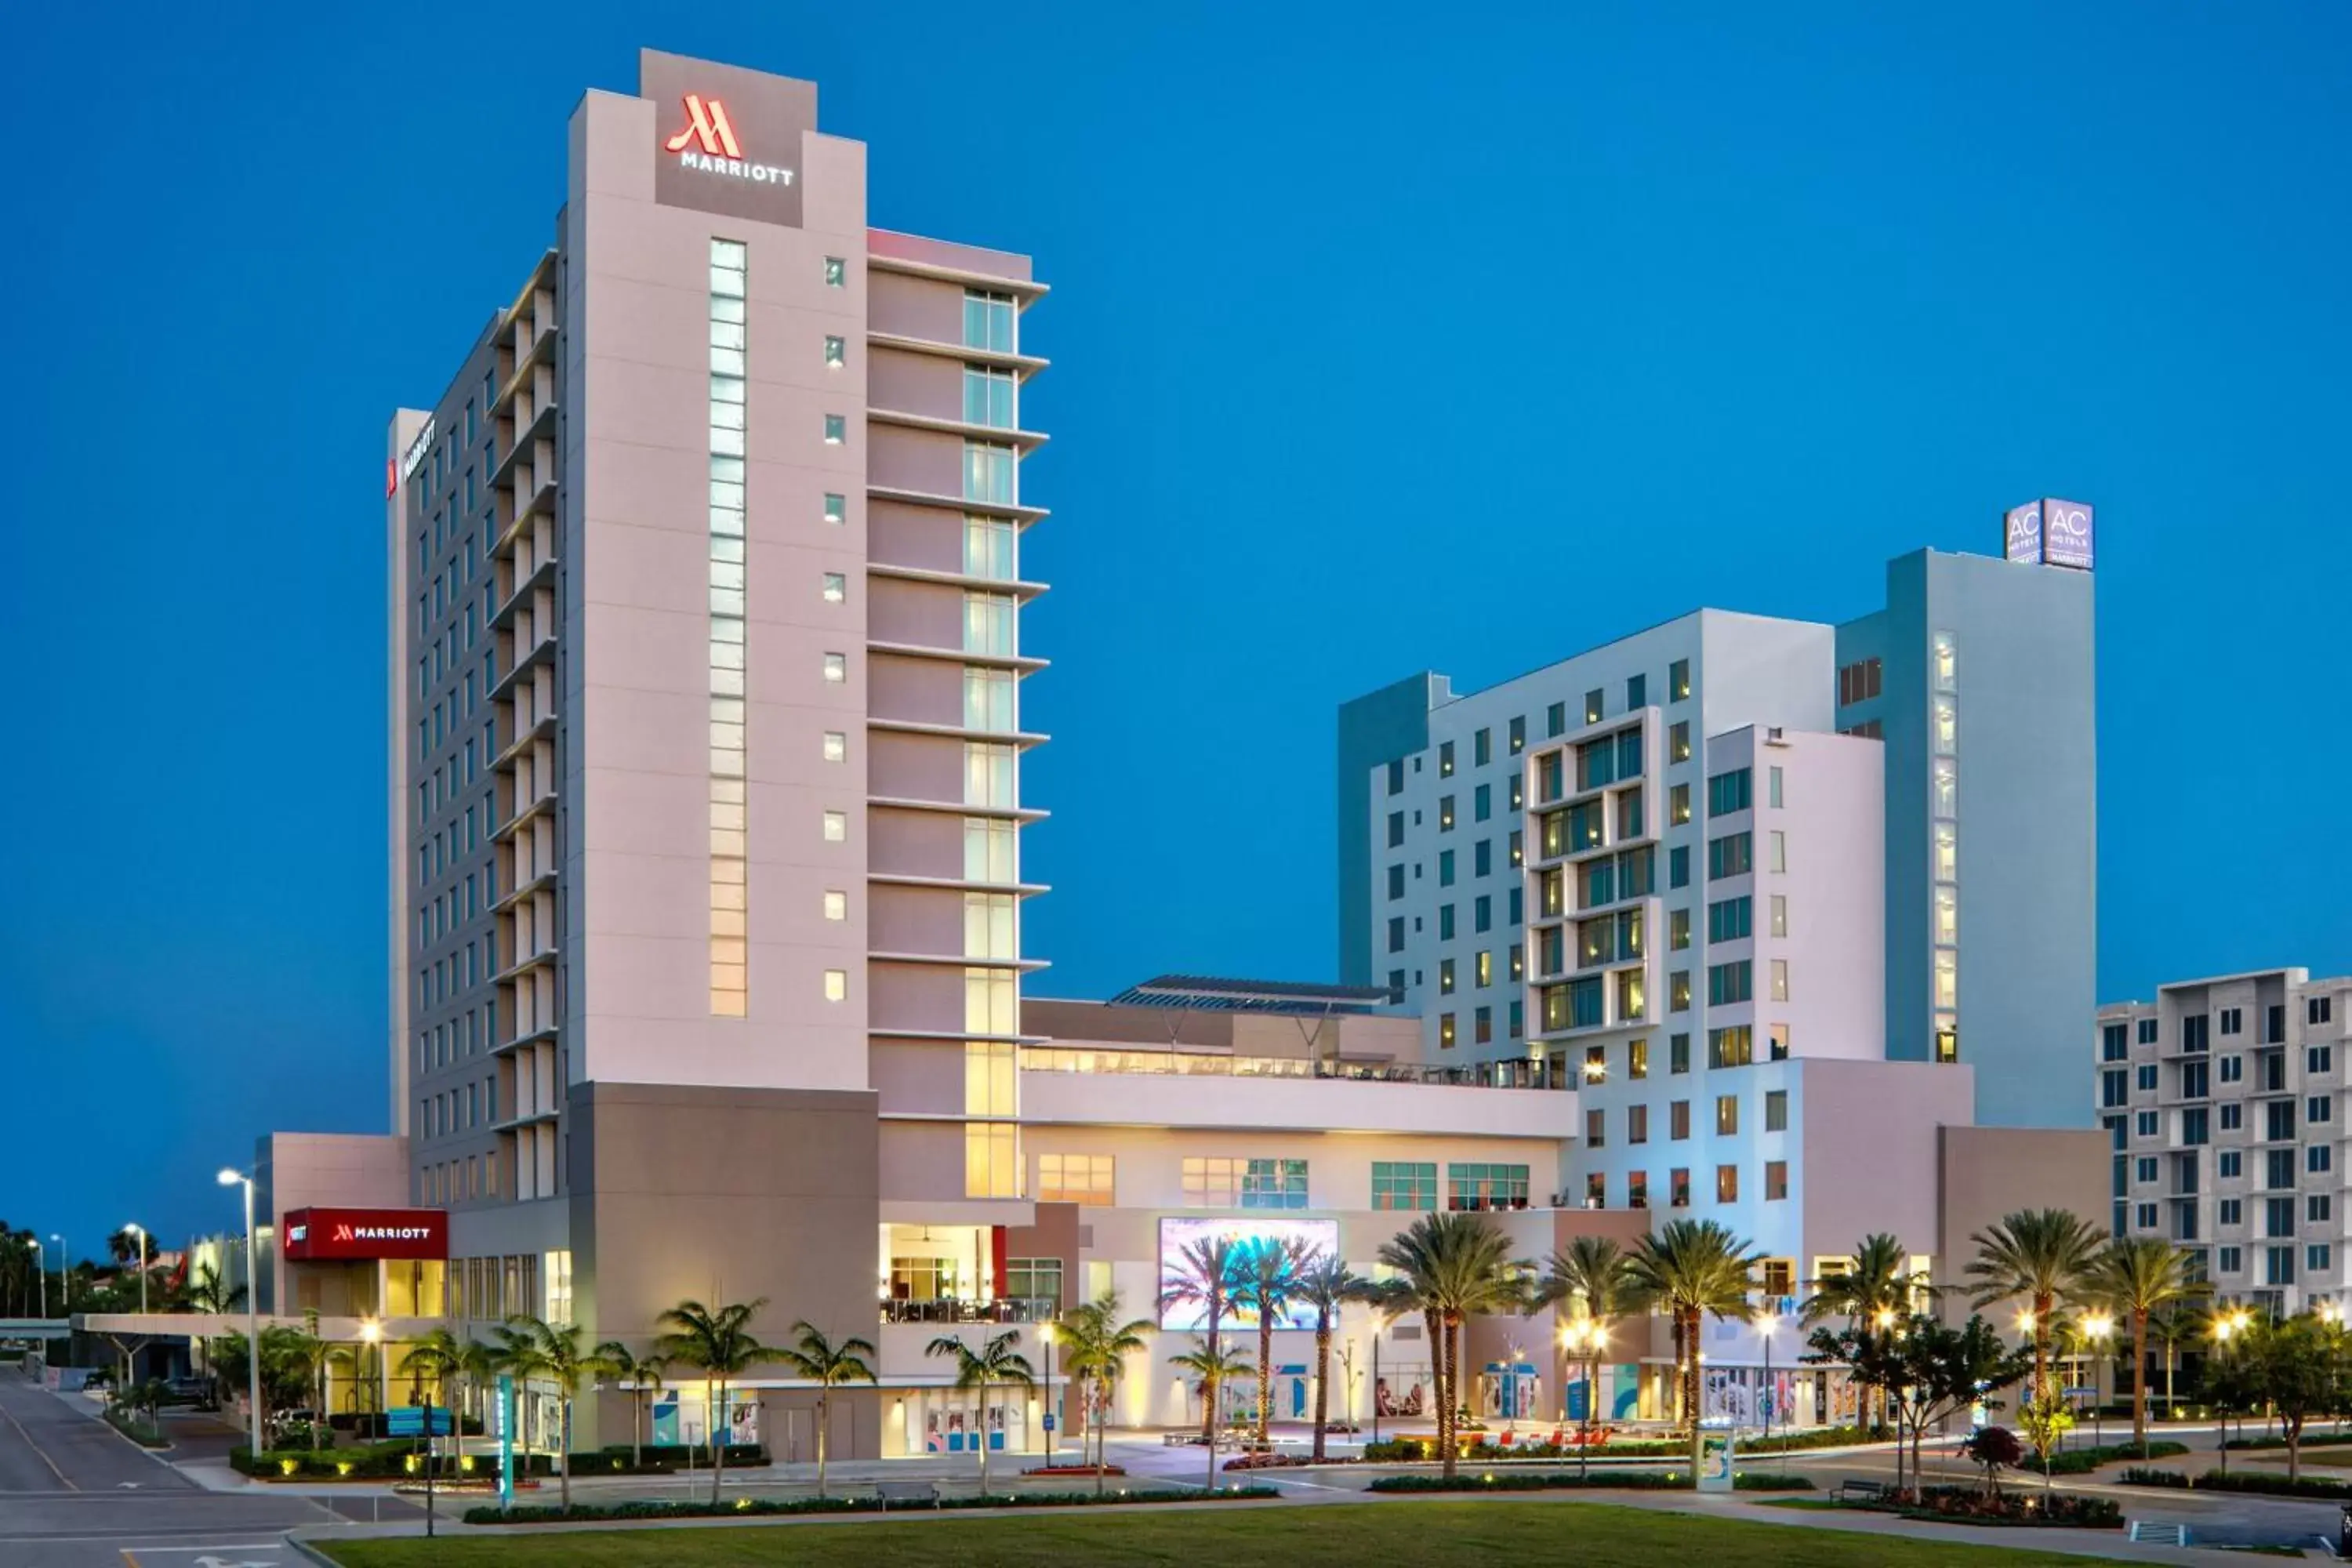 Property Building in AC Hotel by Marriott Fort Lauderdale Airport